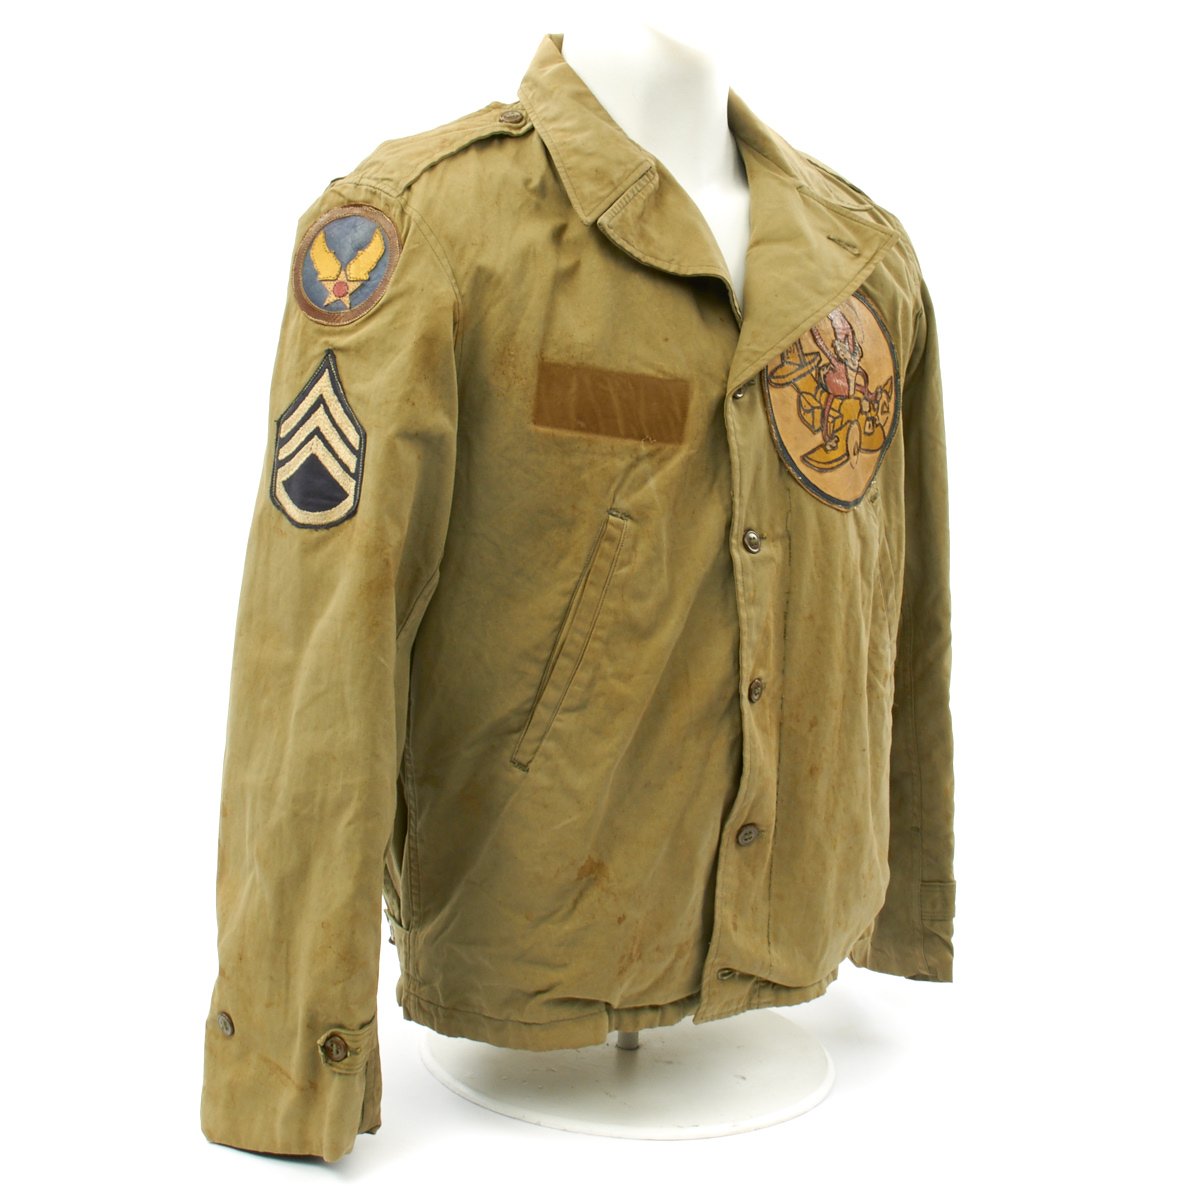 Can I put Military patches on denim jacket? - AIR FORCE (USAAF IS